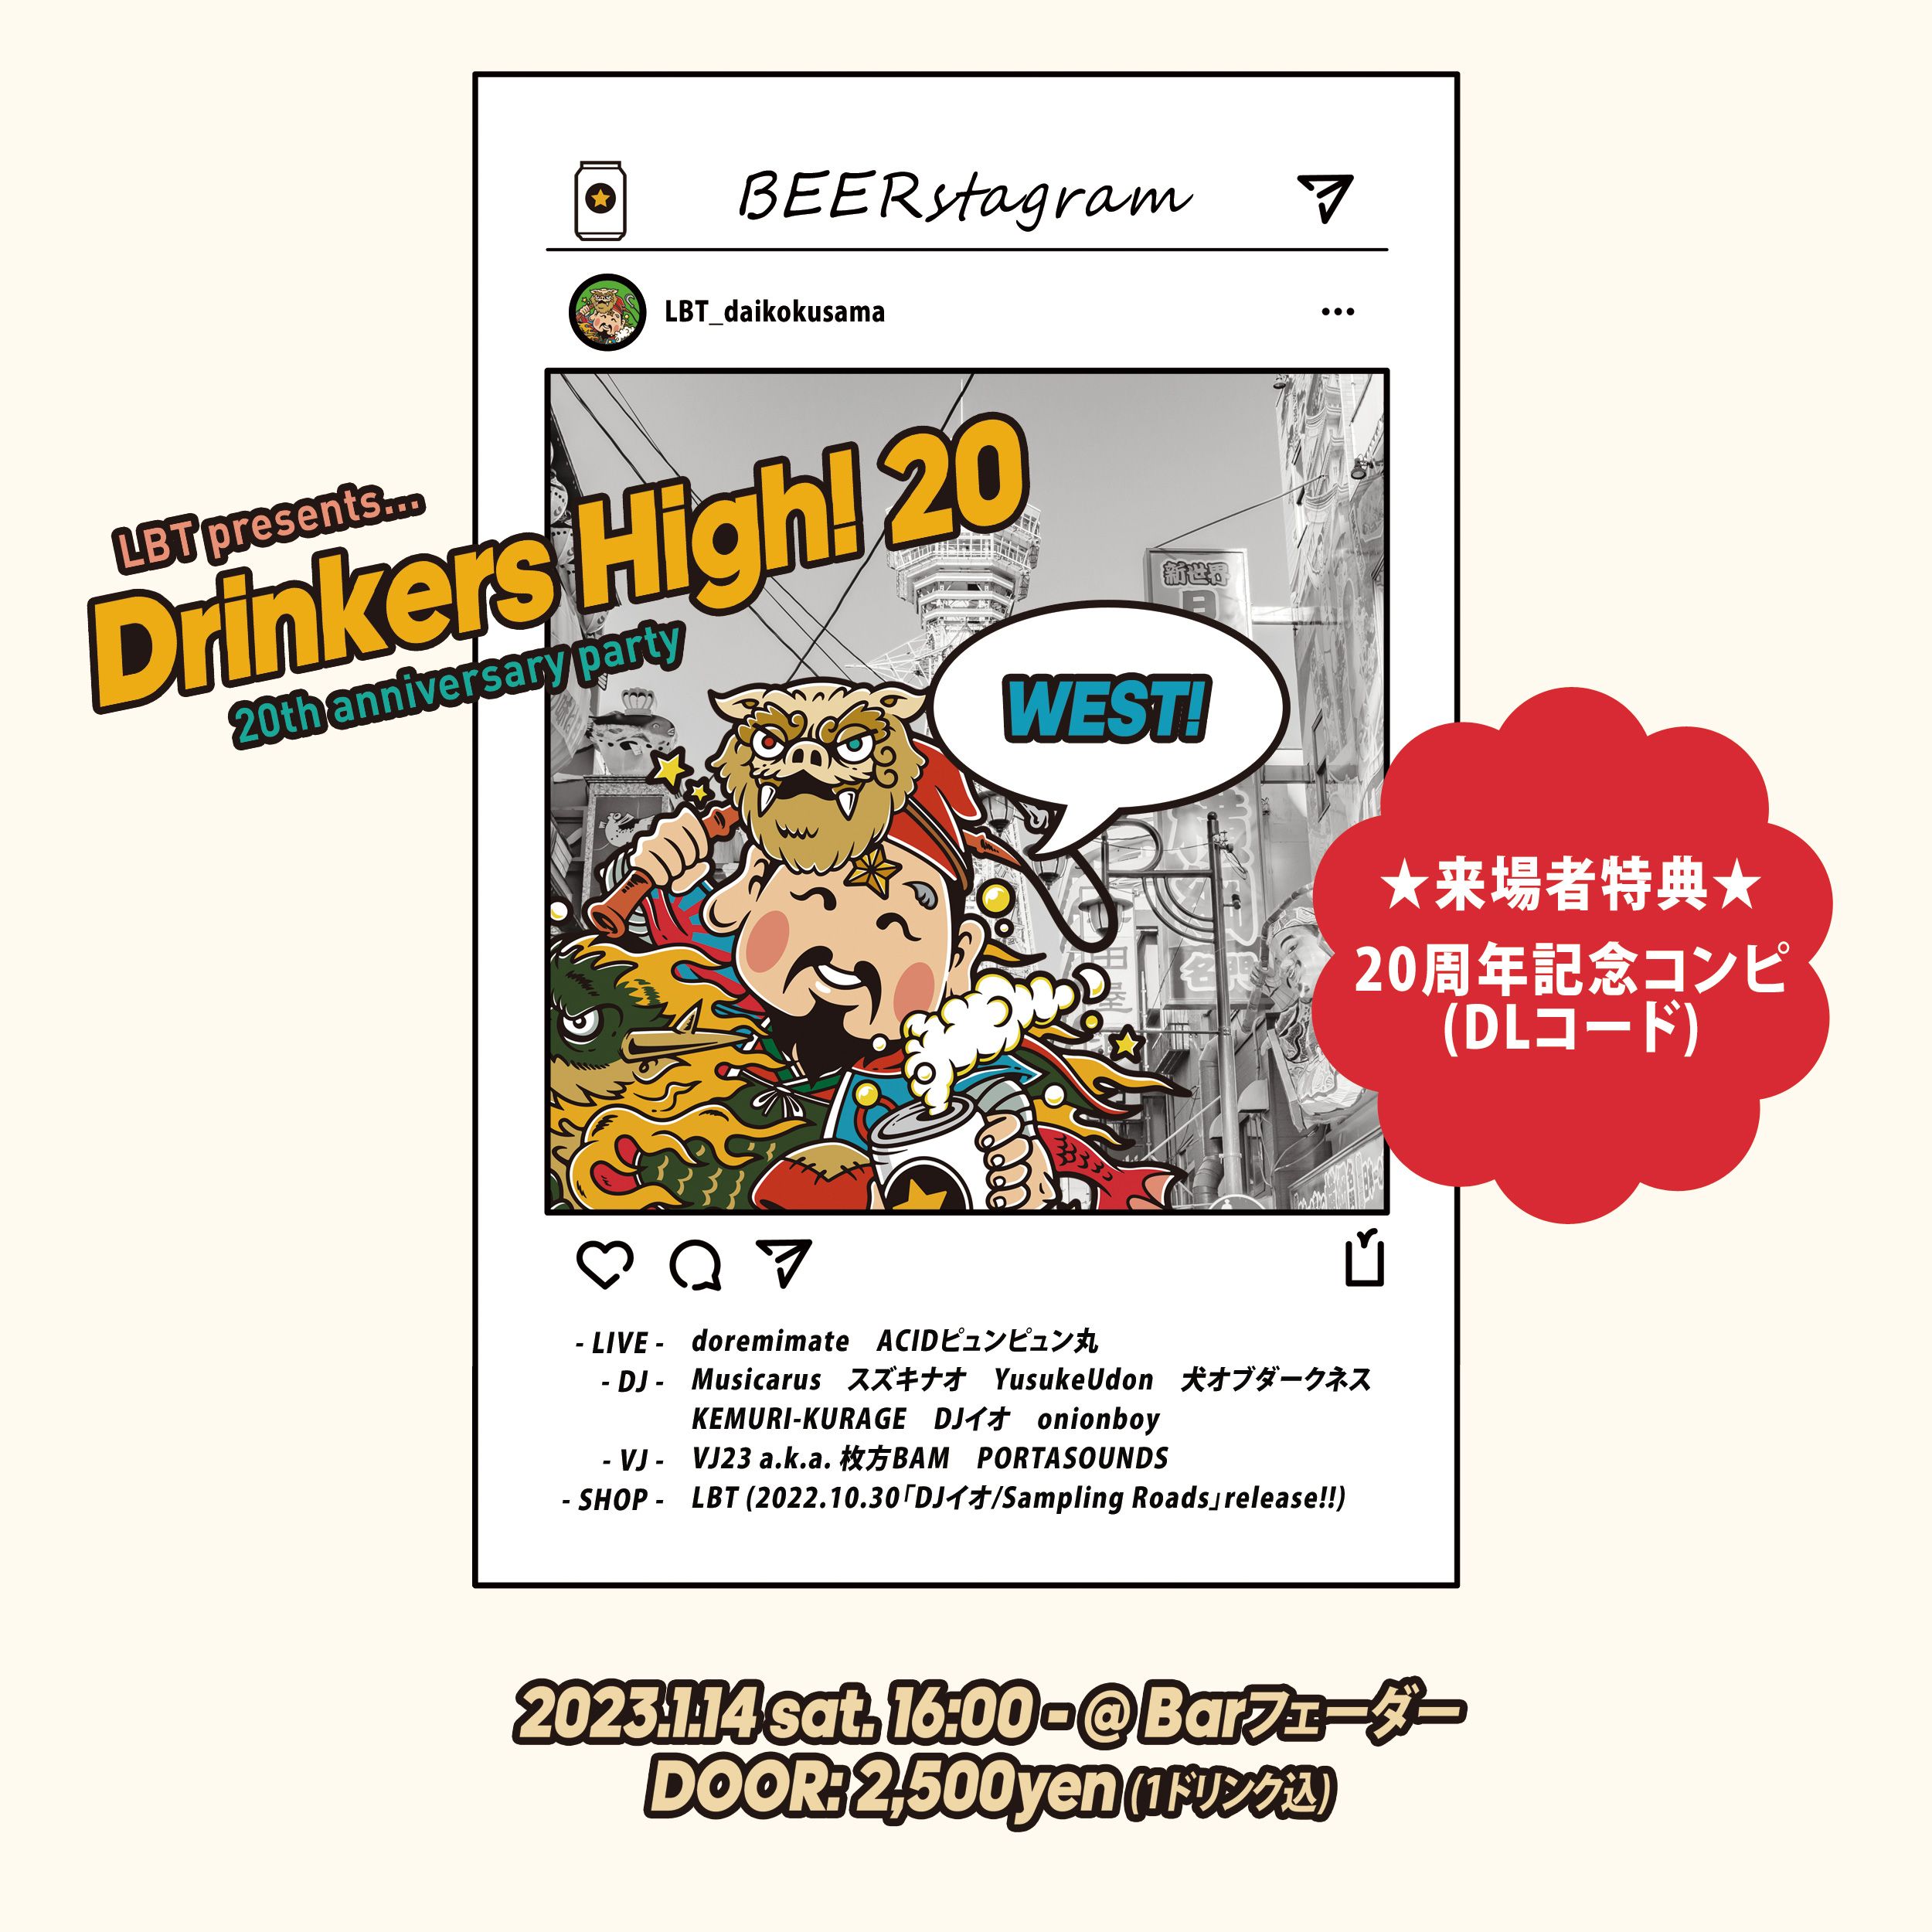 Drinkers High! 20 -WEST-